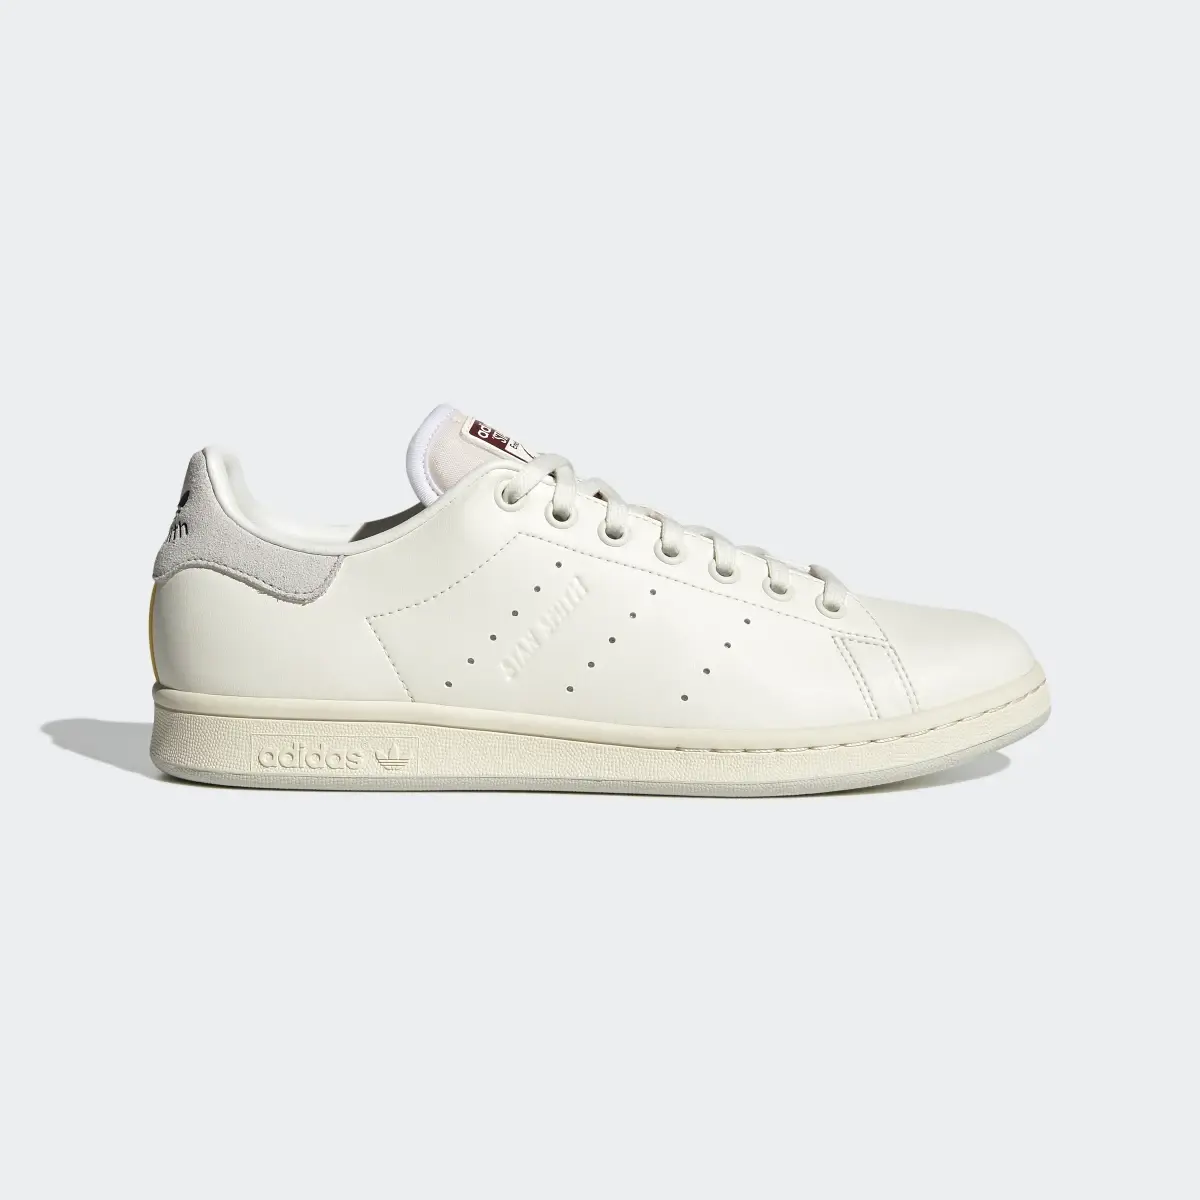 Adidas Stanniversary Stan Smith Shoes. 2